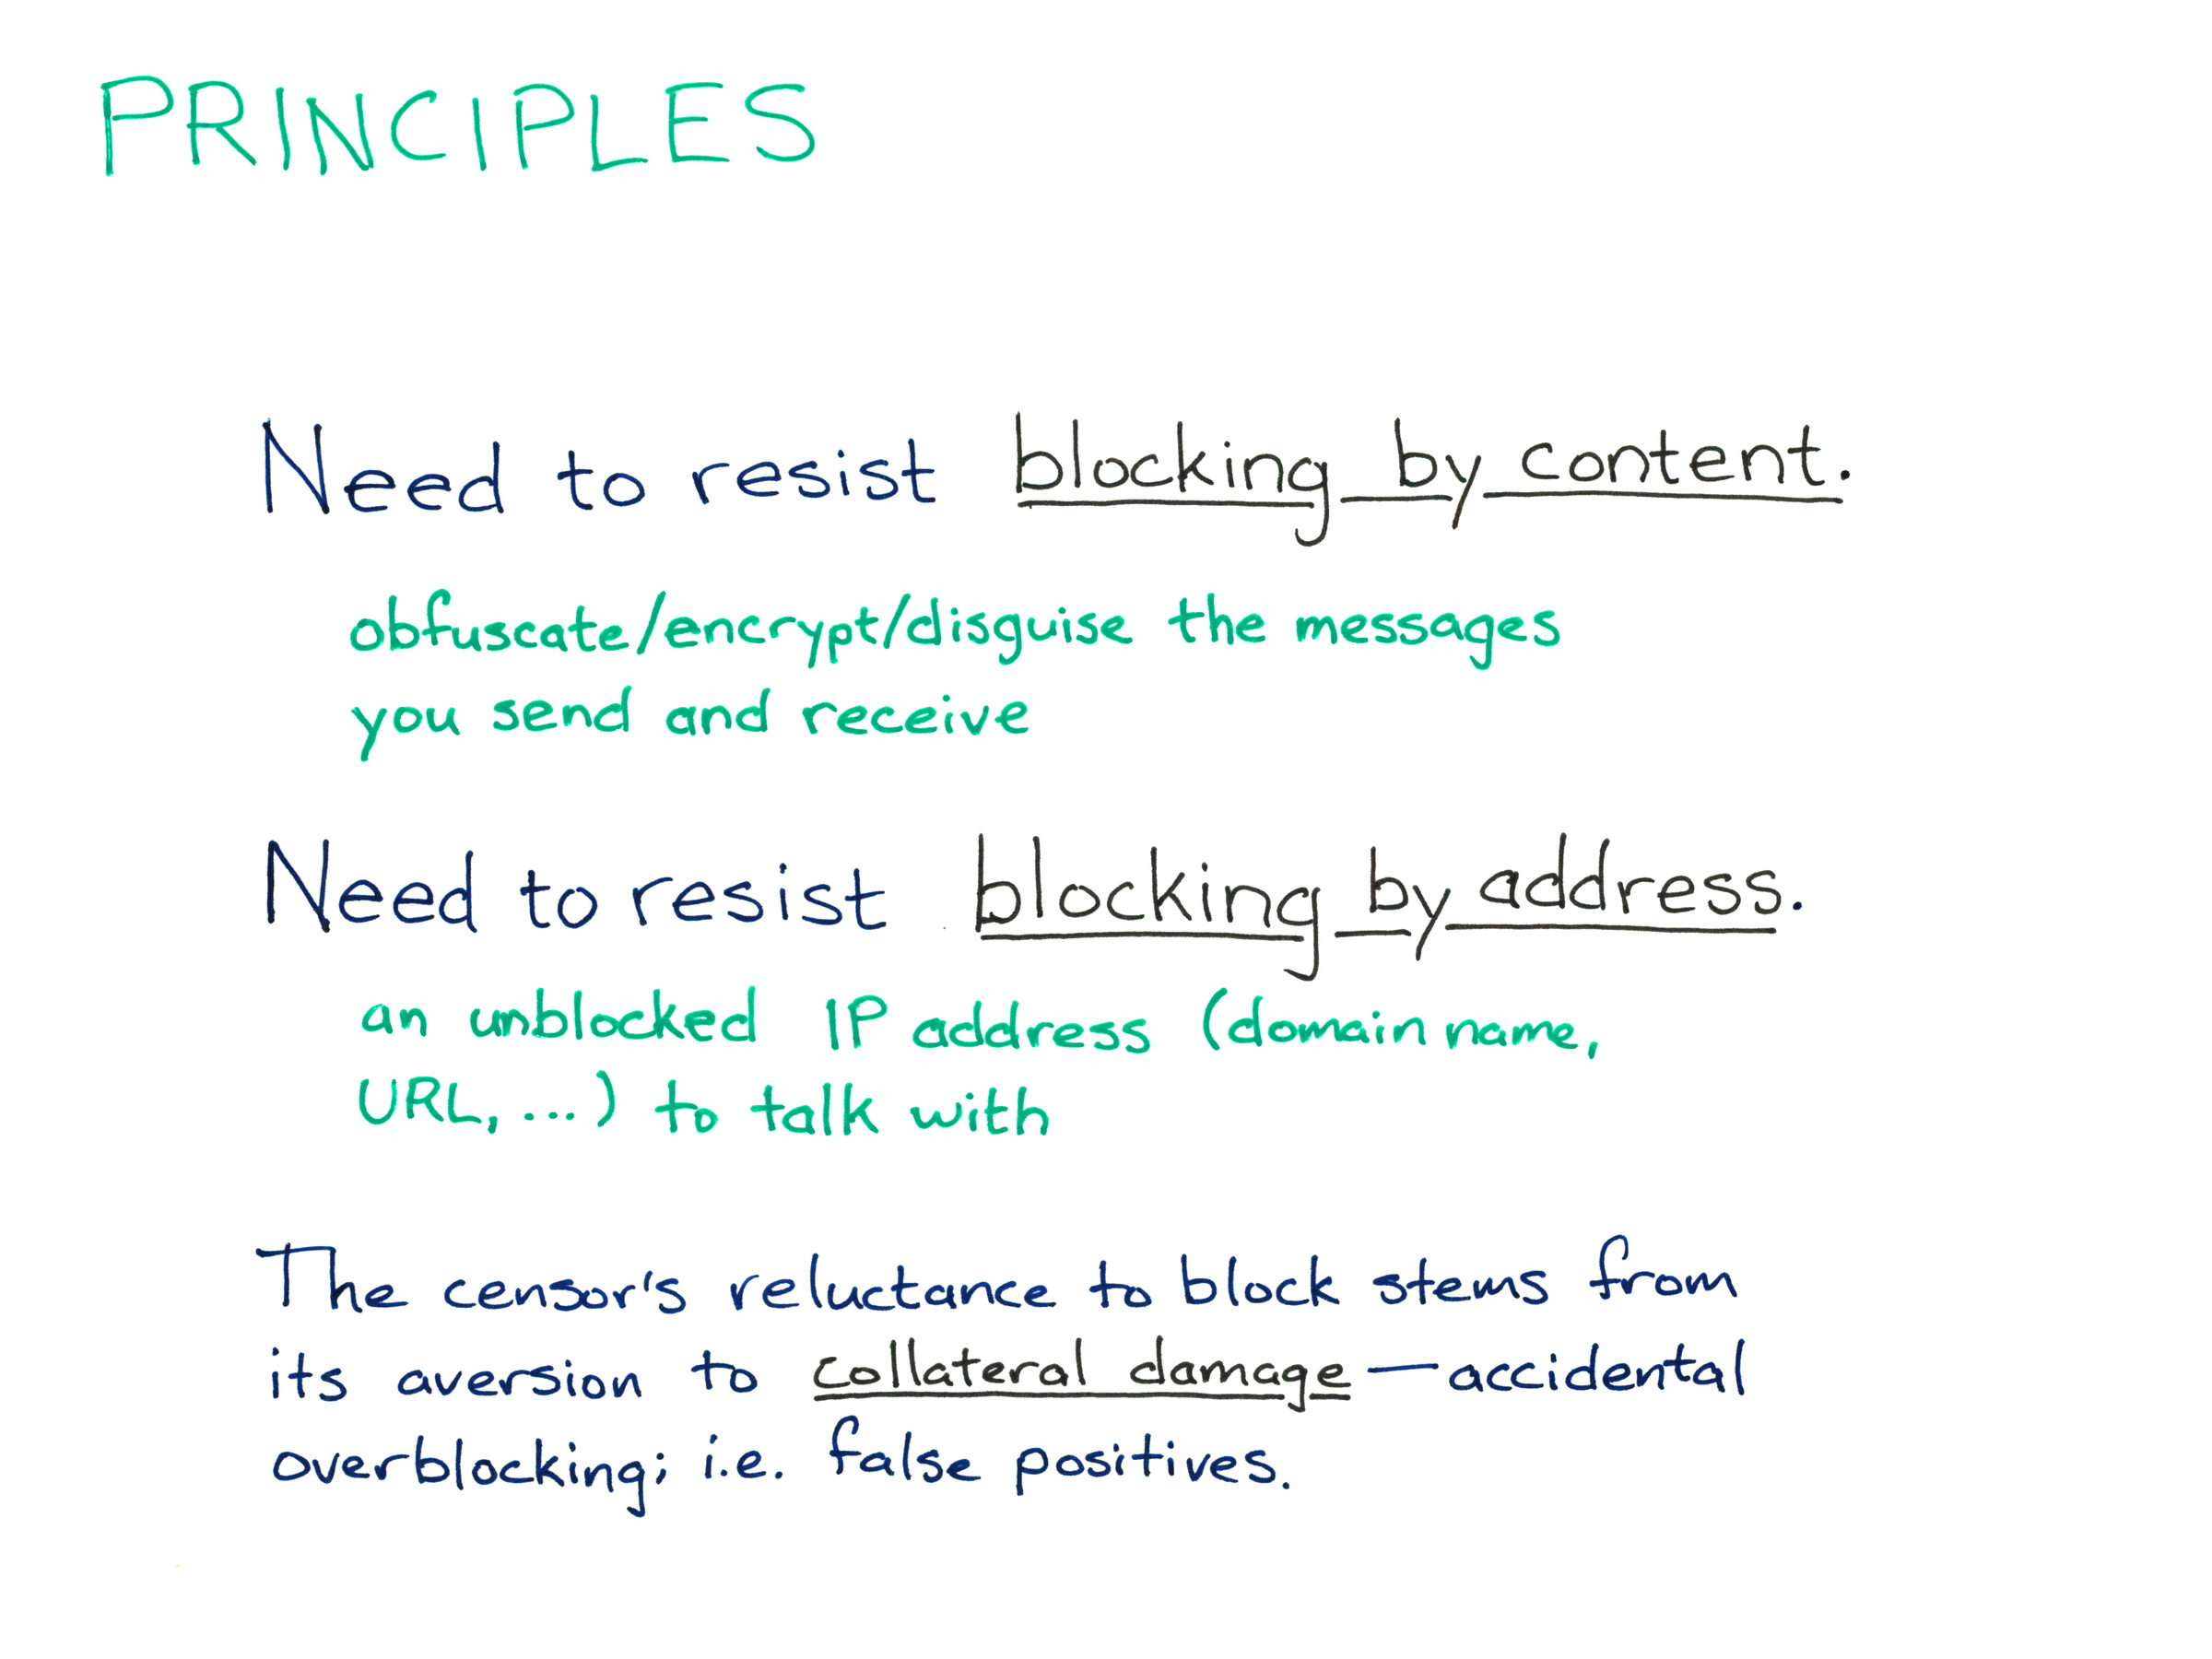 
PRINCIPLES

Need to resist blocking by content.
obfuscate/encrypt/disguise the messages you send and receive

Need to resist blocking by address.
an unblocked IP address (domain name, URL, ...) to talk with

The censor’s reluctance to block stems from its aversion to collateral damage – accidental overblocking; i.e. false positives.
